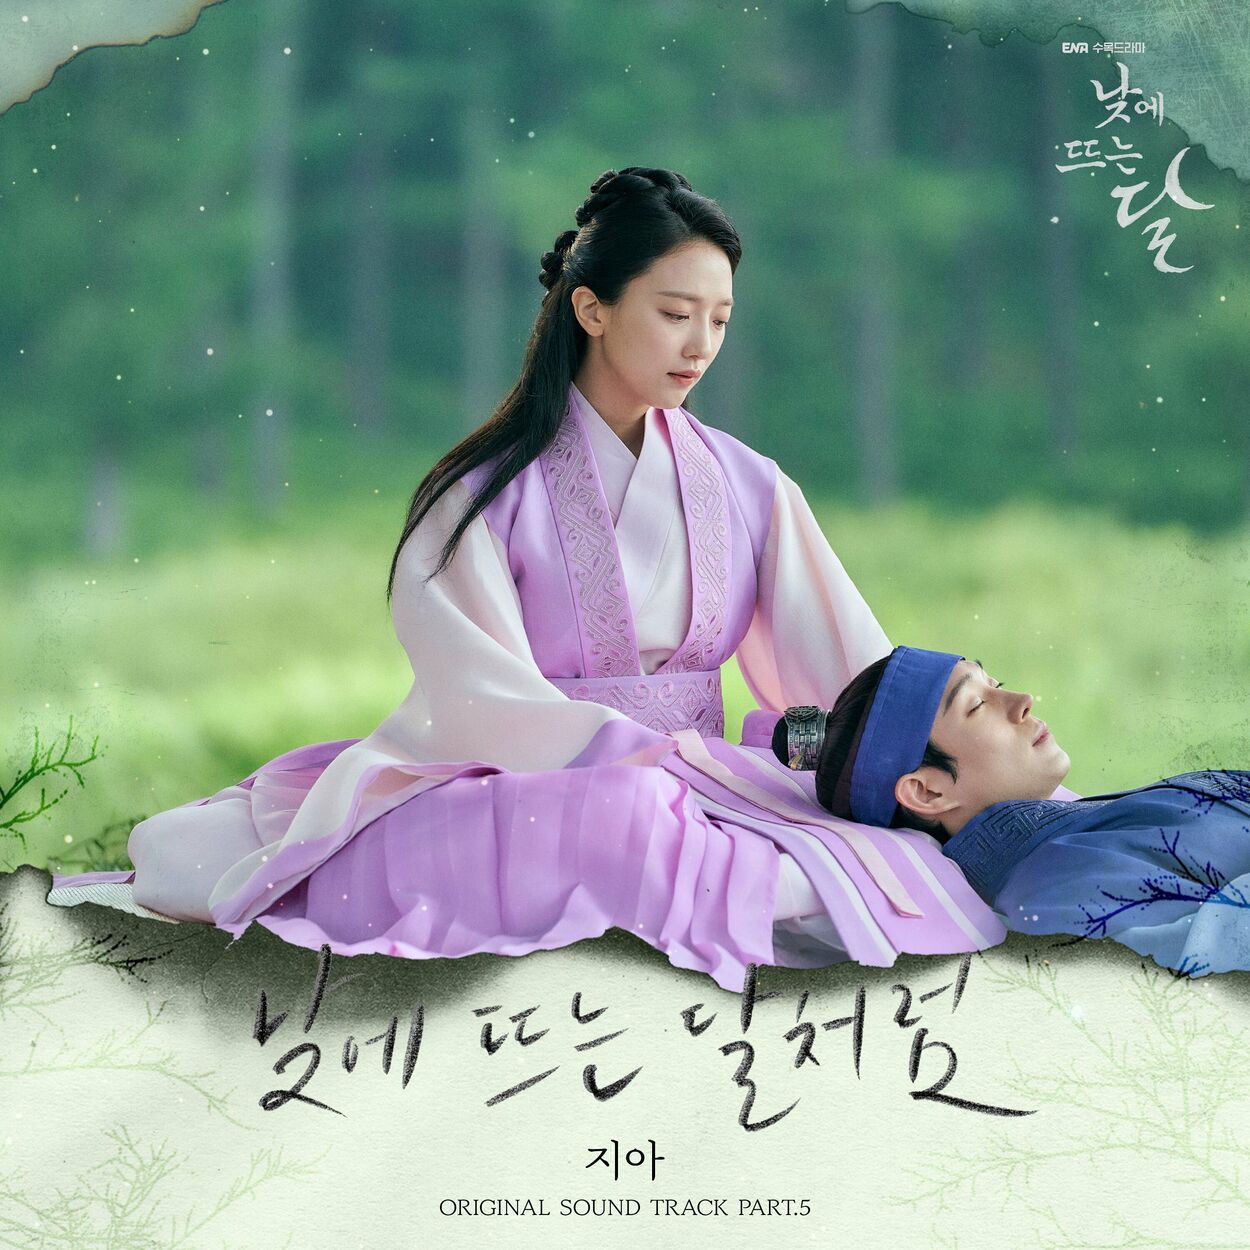 Zia – Moon in the day, Pt. 5 OST